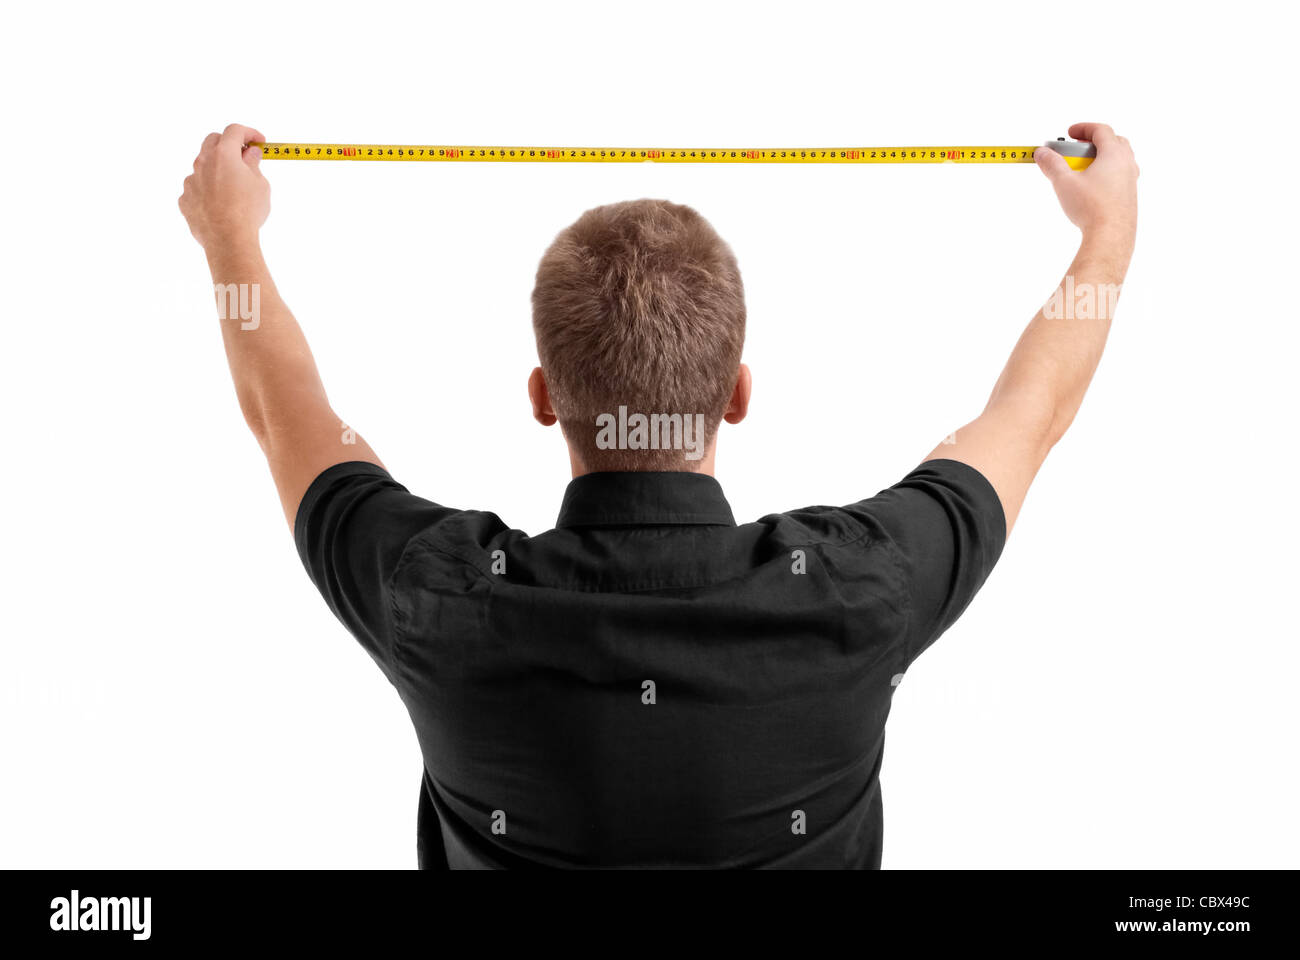 Male measuring by tape measure isolated on white background Stock Photo